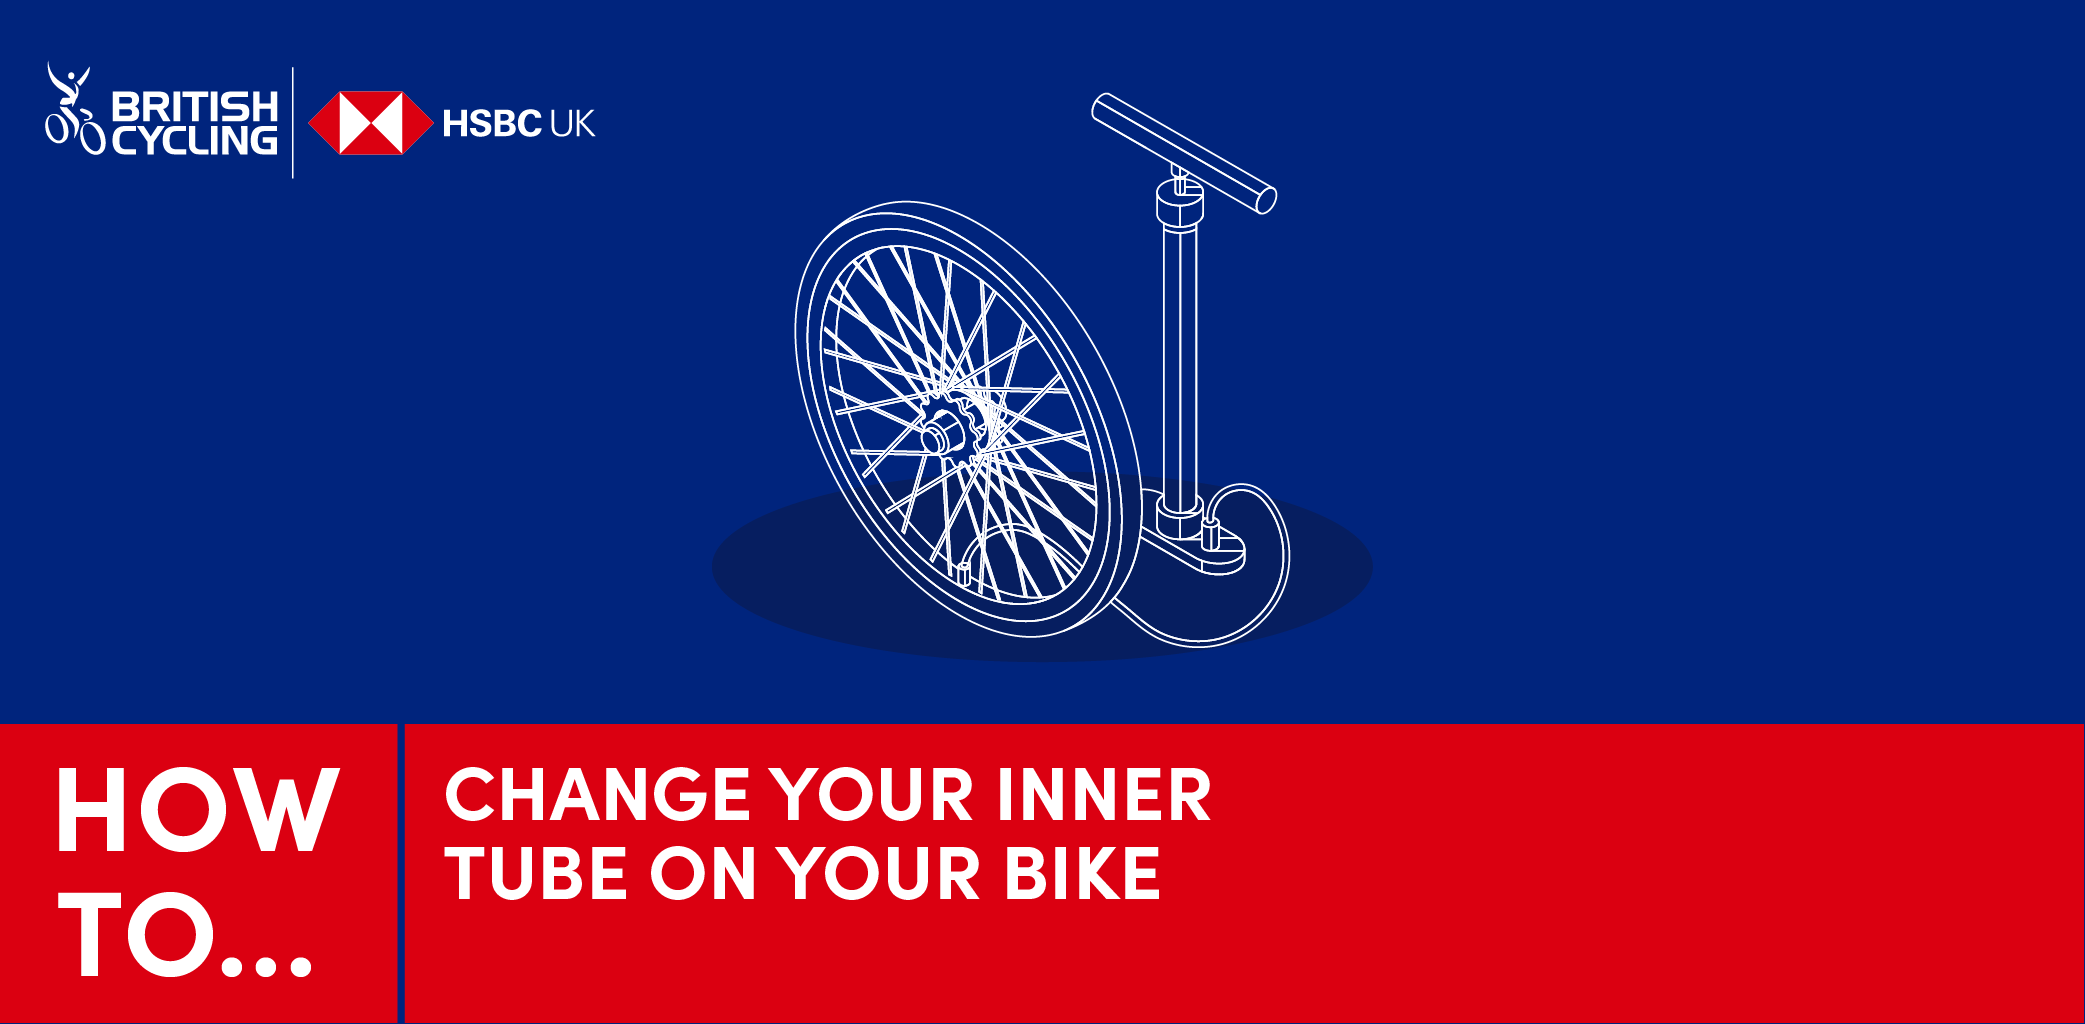 How to change your inner tube on your bike